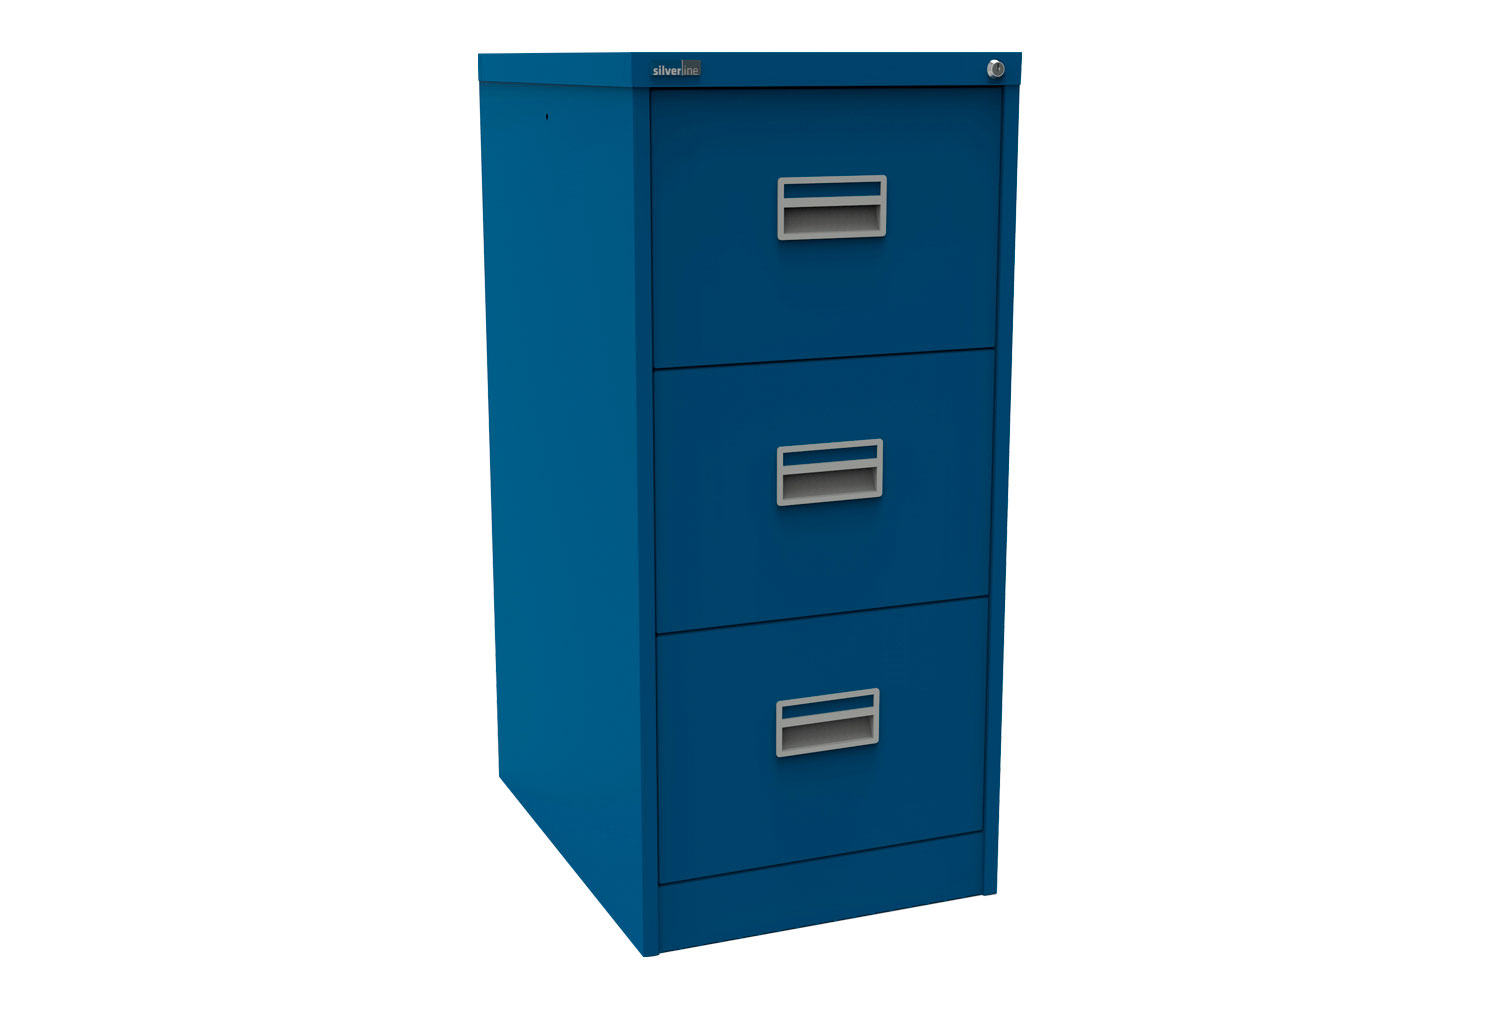 Silverline Midi 3 Drawer Filing Cabinets, 3 Drawer - 46wx62dx101h (cm), Blue, Fully Installed